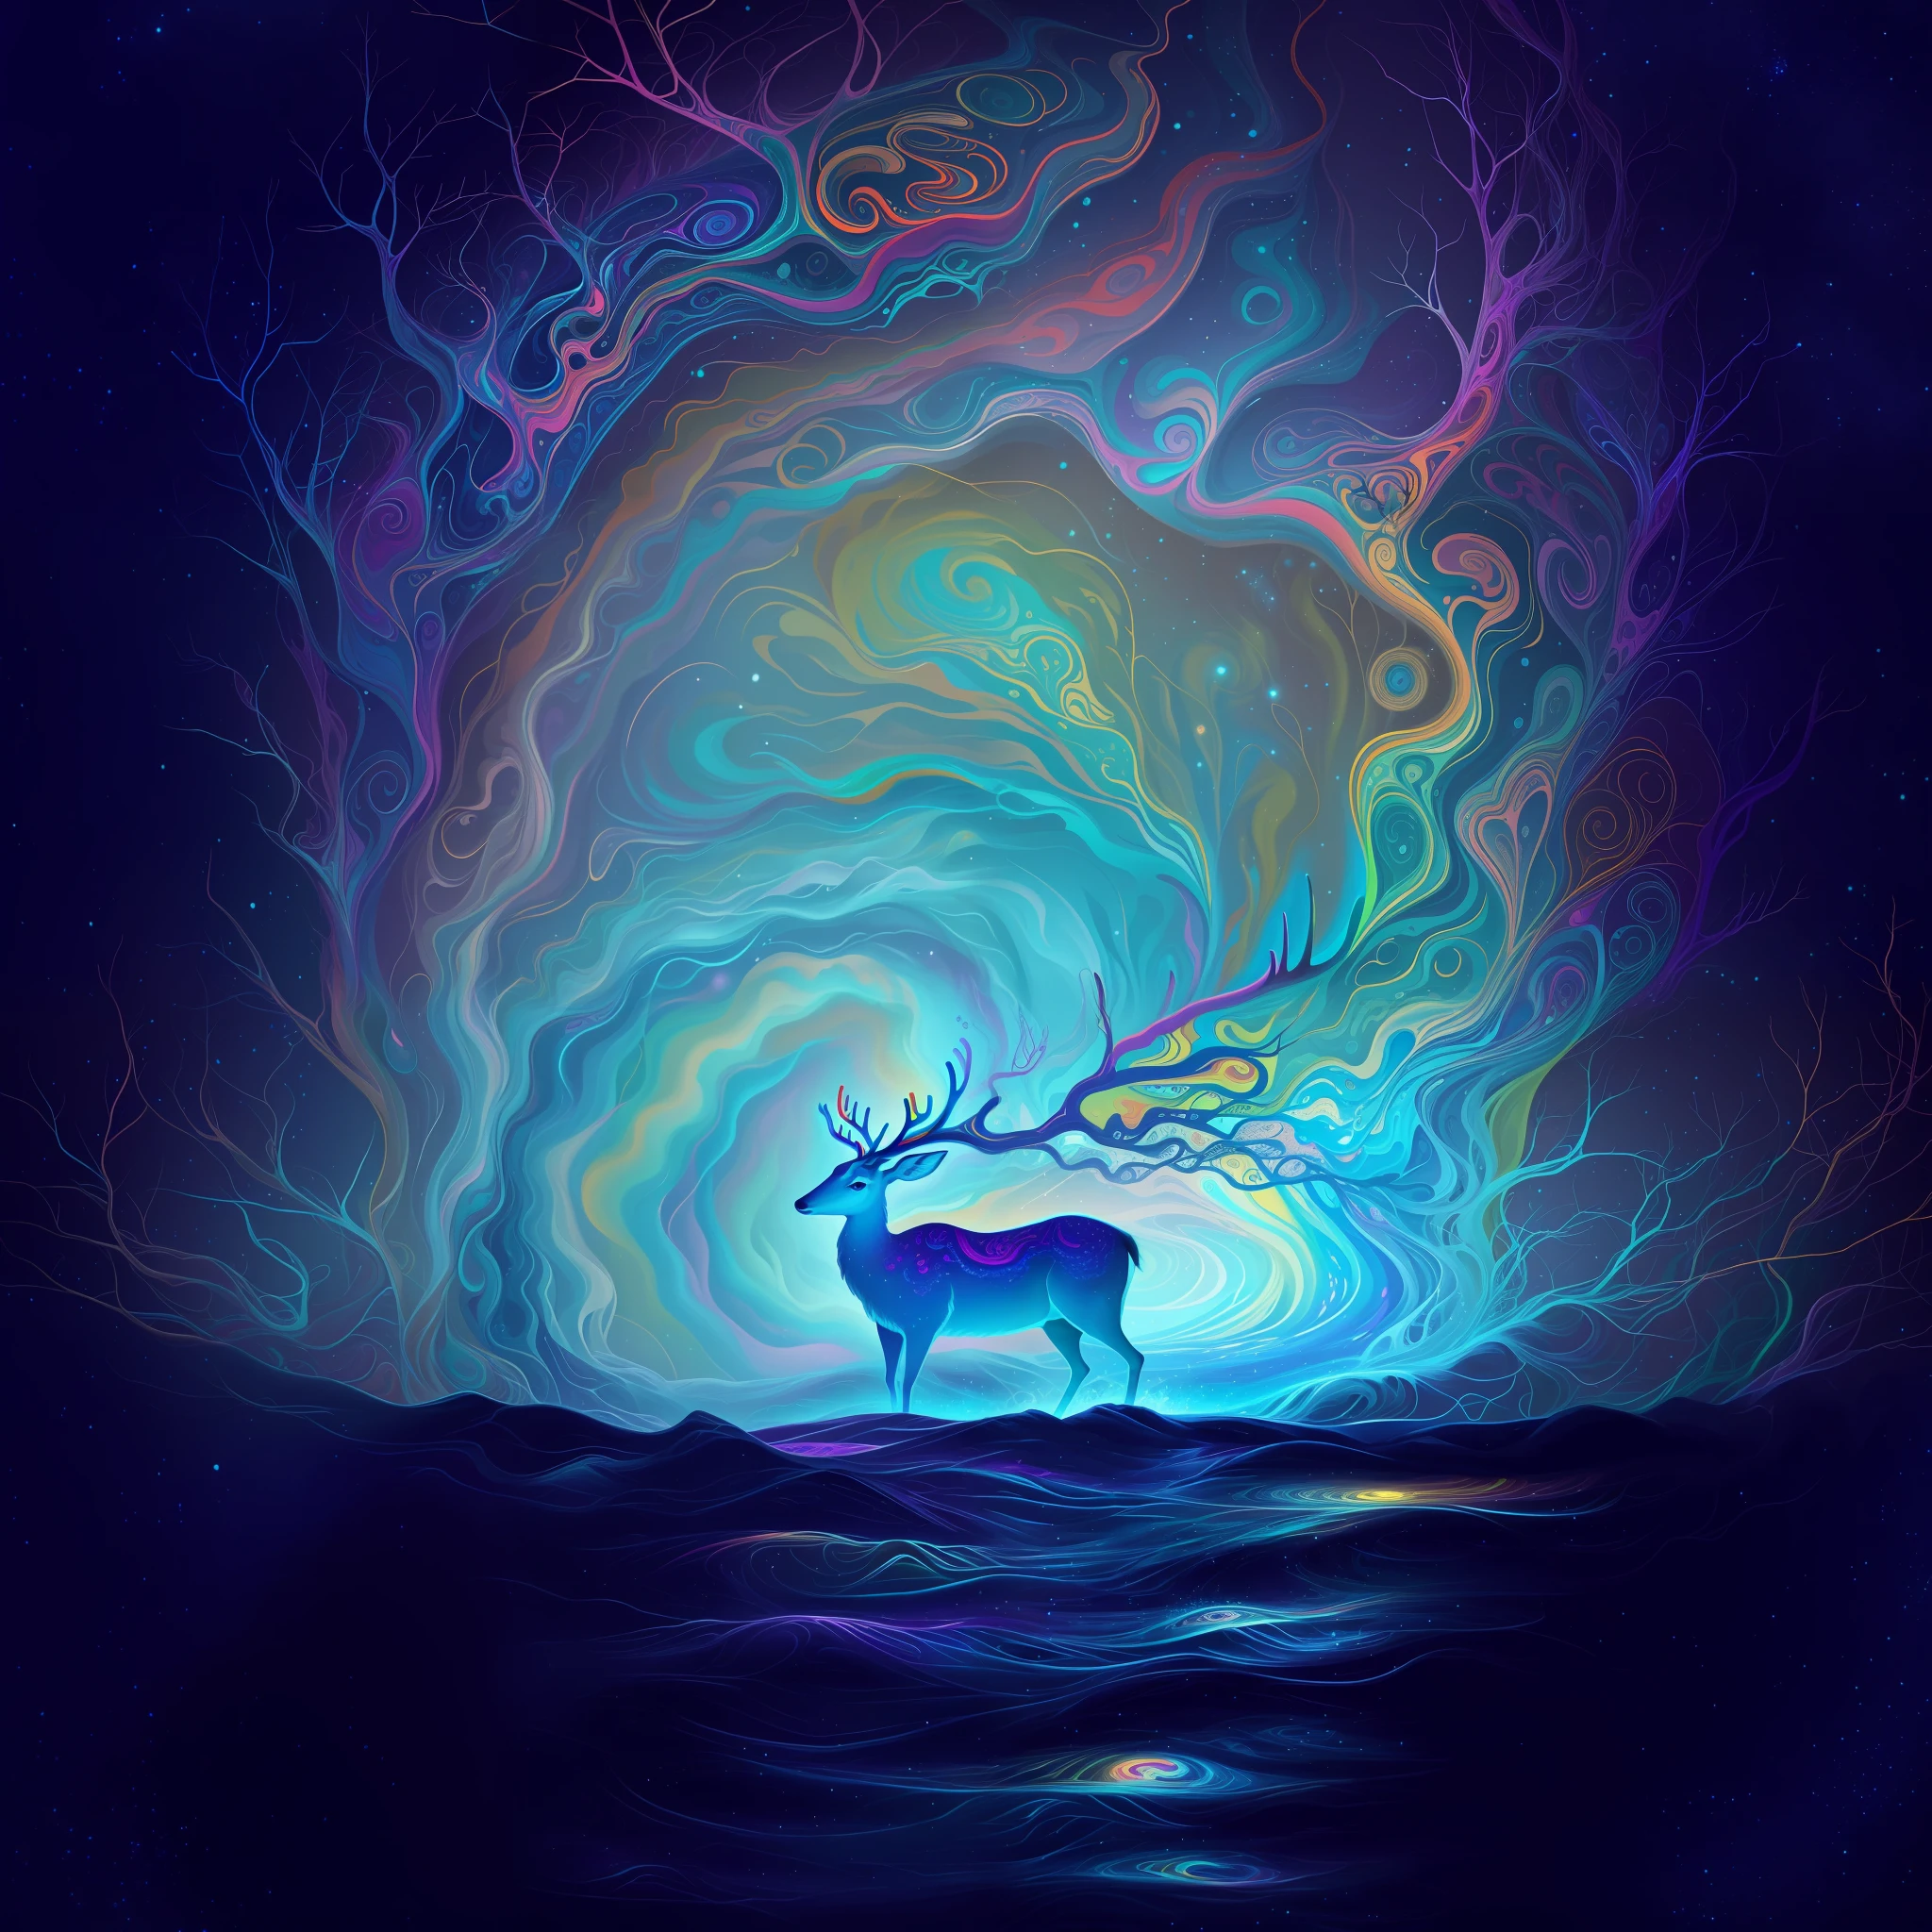 painting of a deer in a colorful swirly landscape with a bright light, jen bartel, james r. eads, psychedelic surreal art, colorful flat surreal ethereal, inspired by Cyril Rolando, swirling bioluminescent energy, surreal psychedelic design, surreal mystical atmosphere, in style of cyril rolando, surreal colors, a beautiful artwork illustration